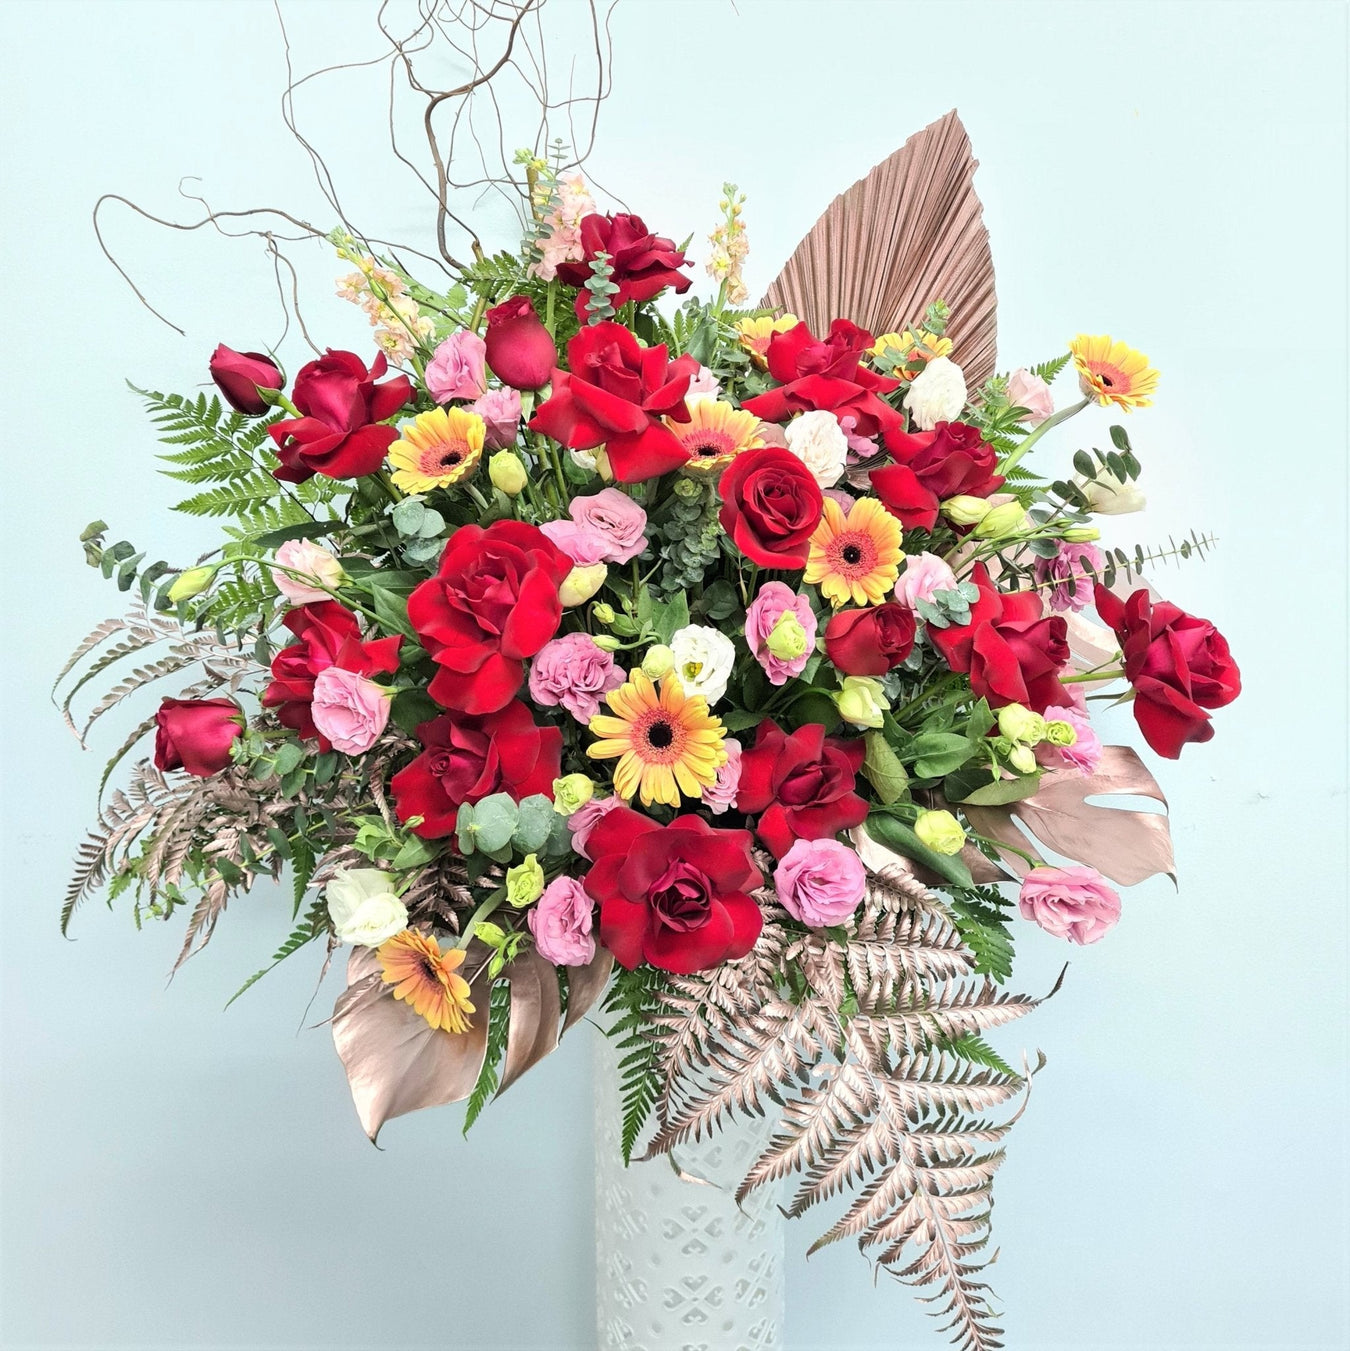 Grand opening flower stand, flower stand Singapore, Flower Delivery Singapore, Florist Singapore, Well Live Florist